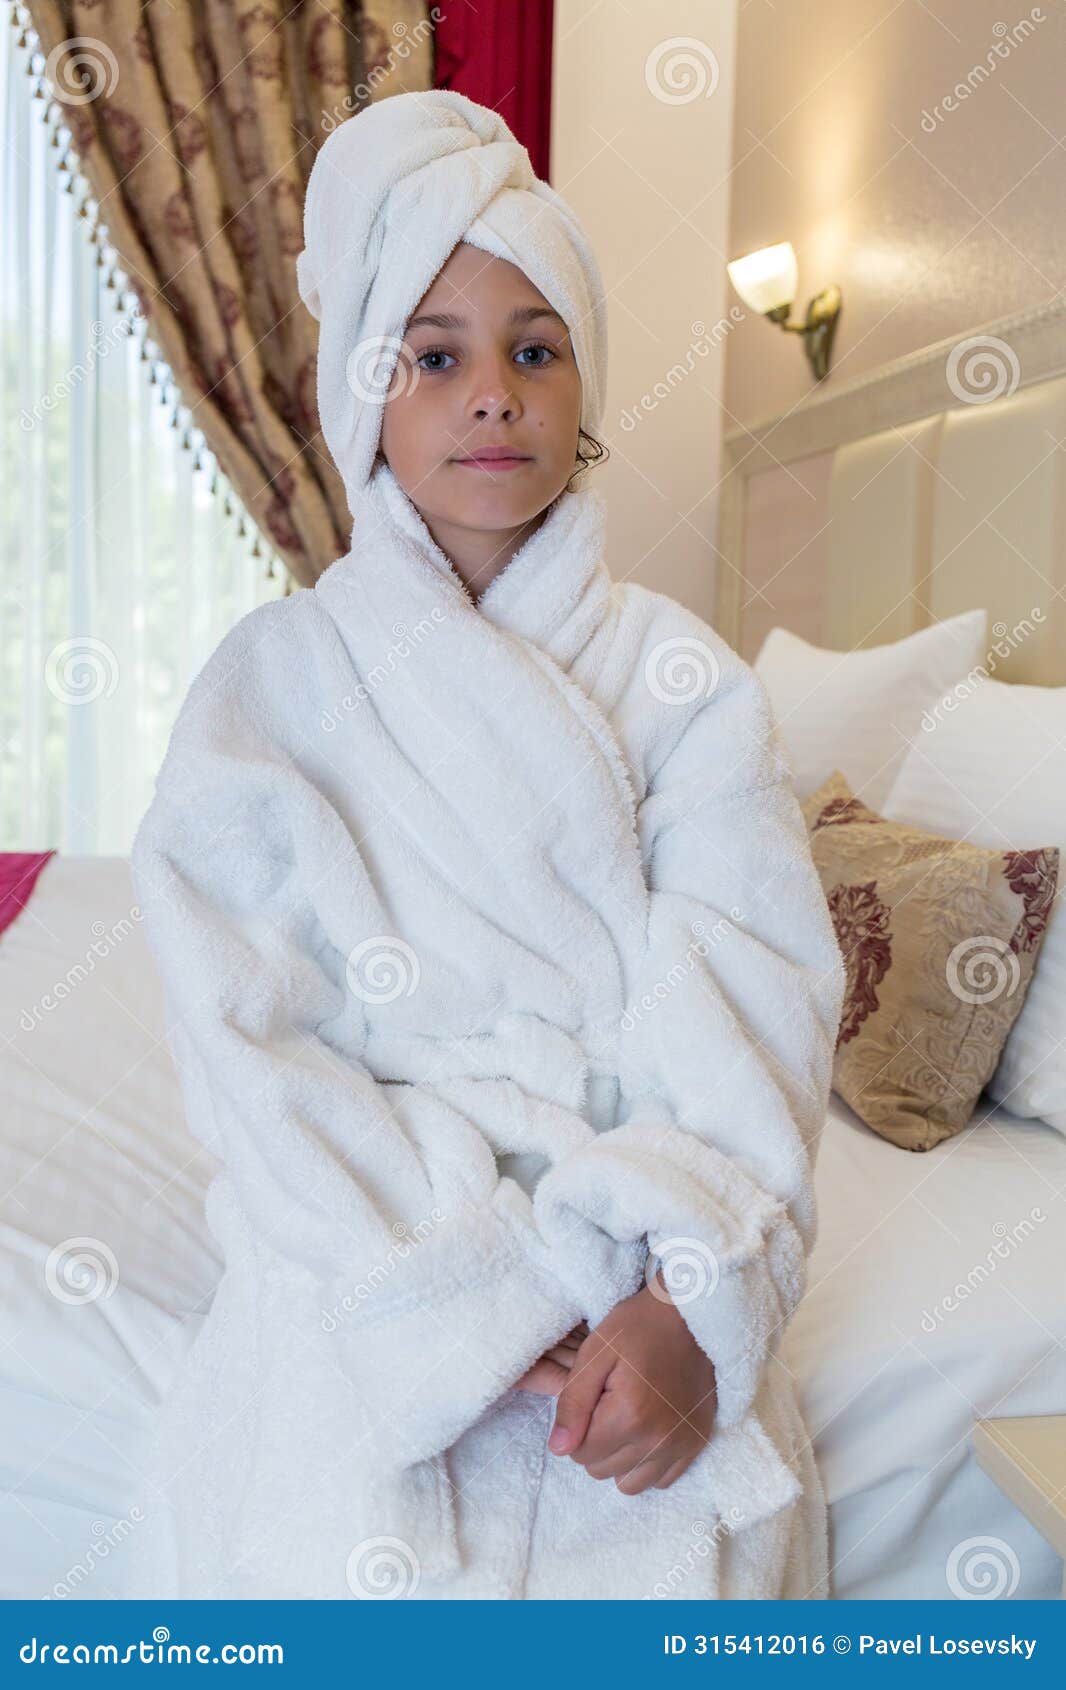 girl in a bathrobe with a towel on her head in a